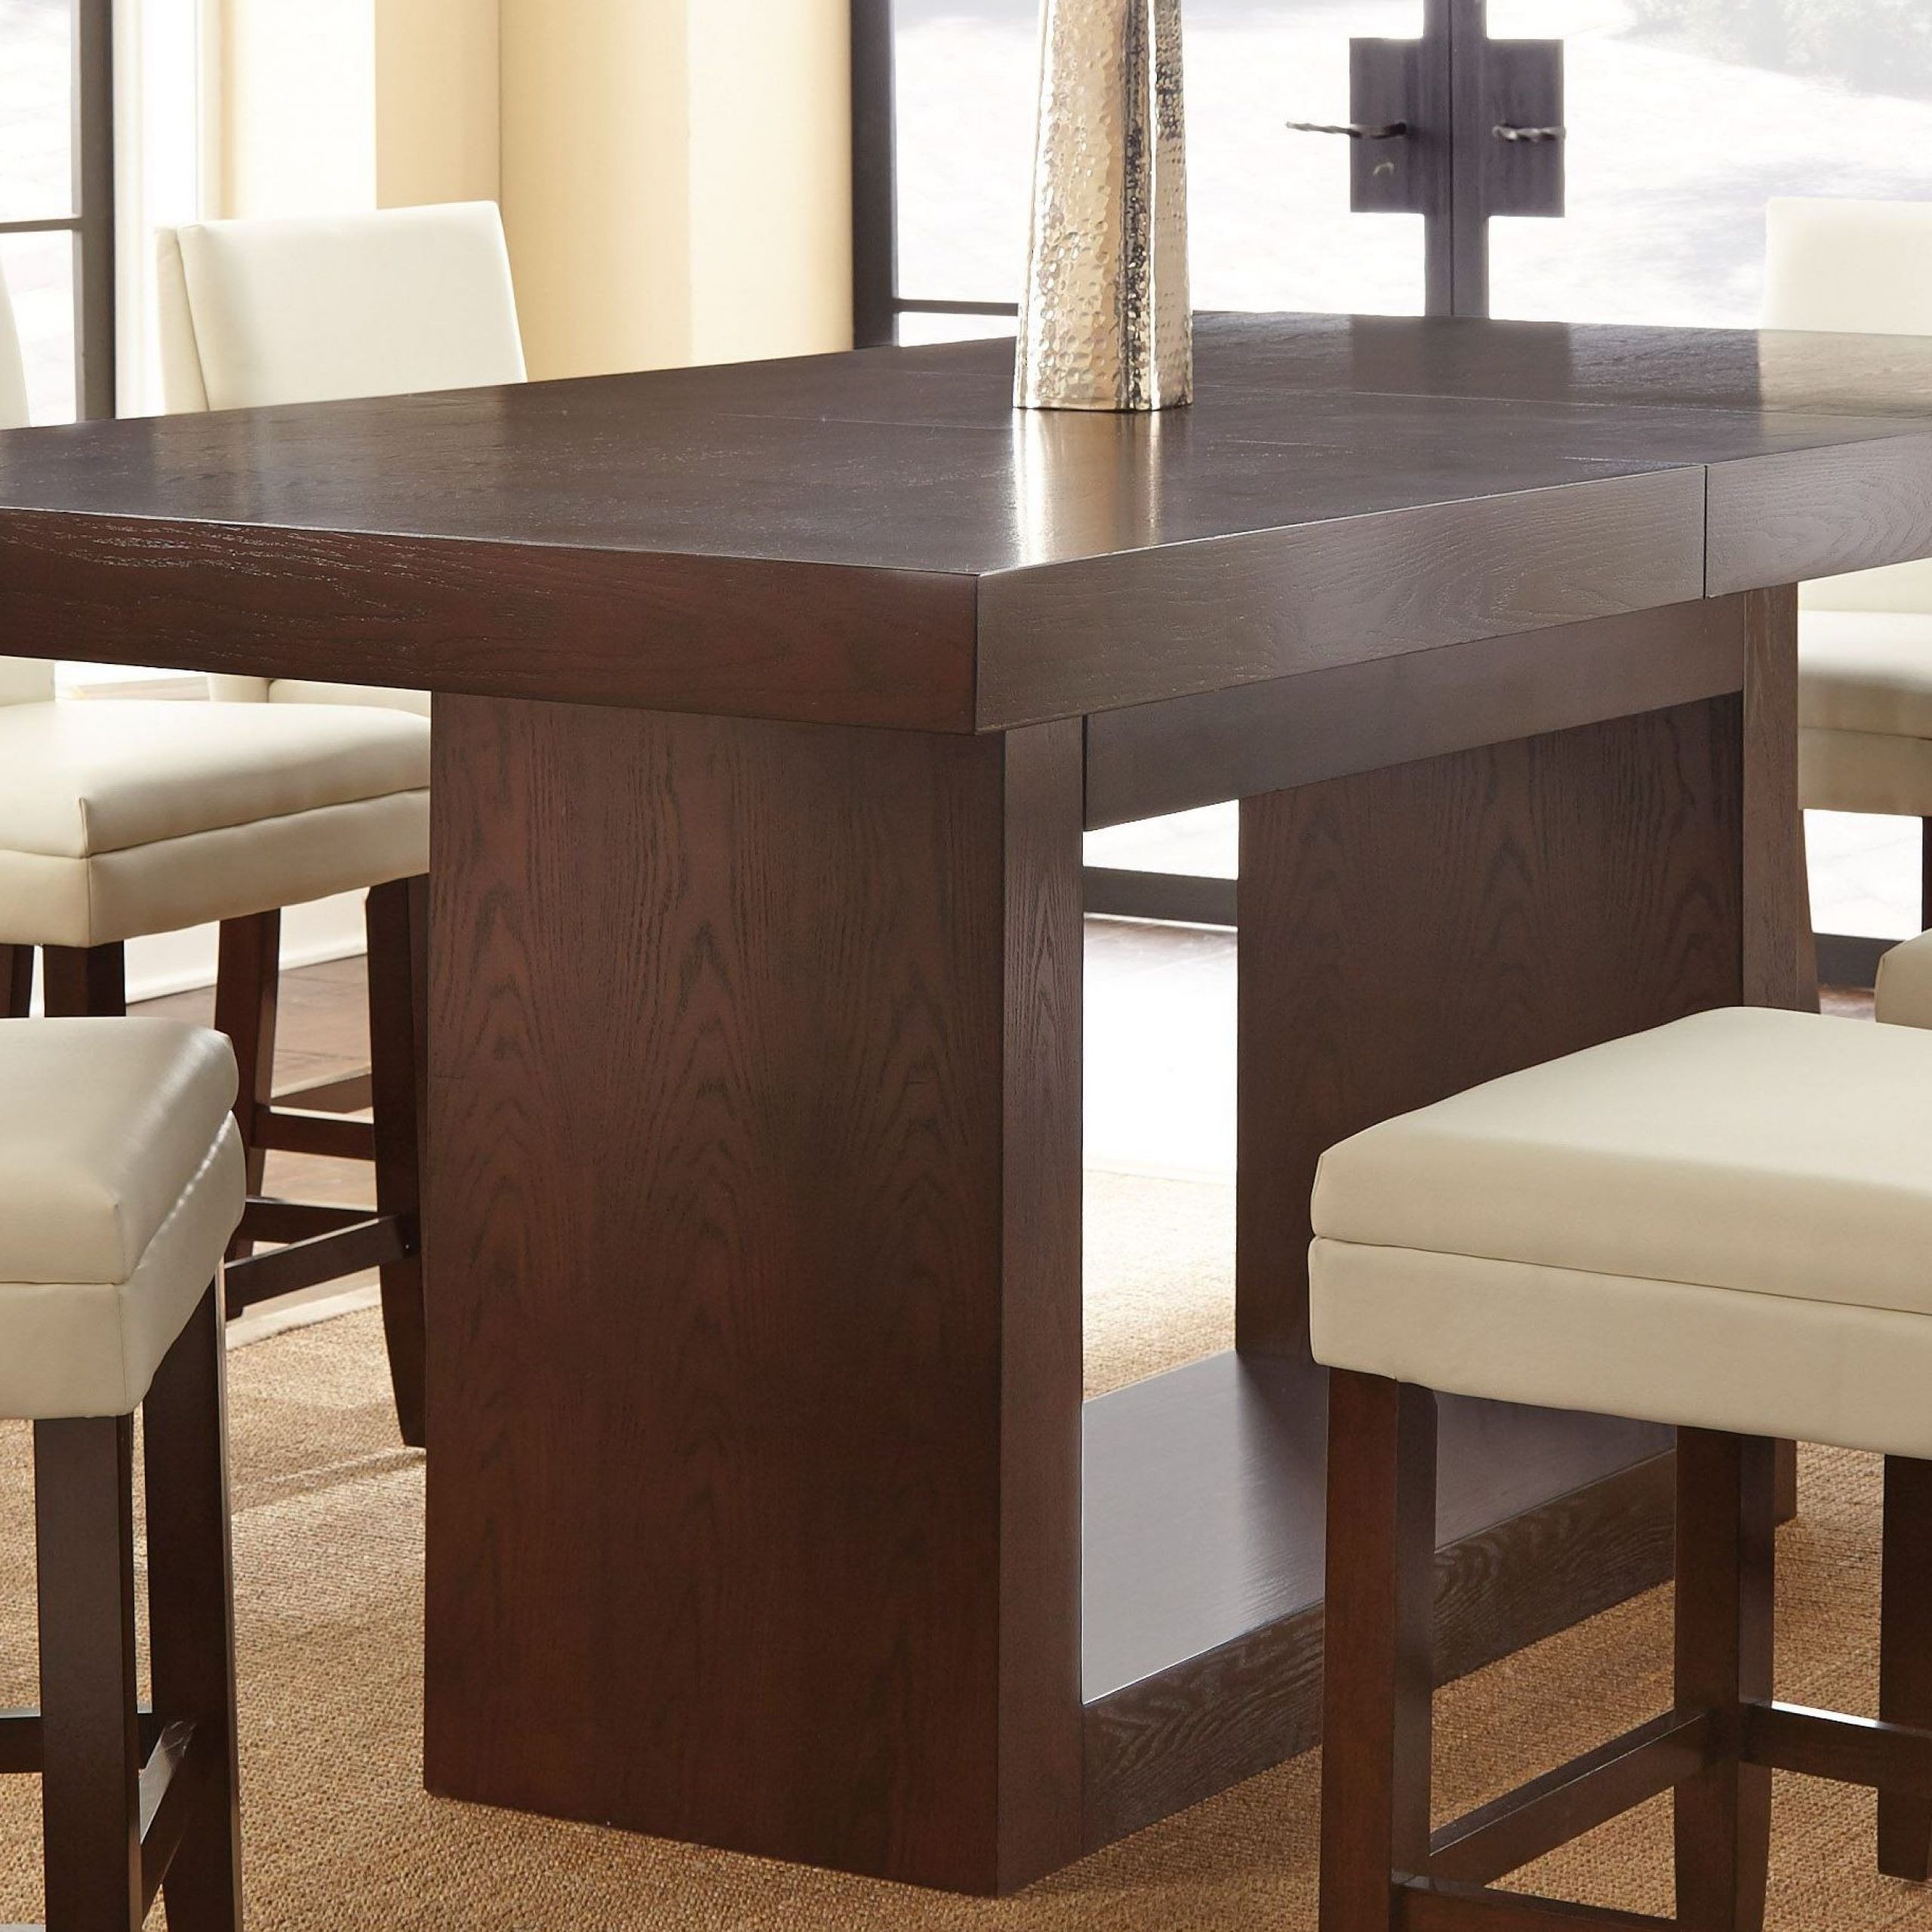 Antonio Extendable Rectangular Counter Height Dining Table Intended For Current White Rectangular Dining Tables (View 2 of 15)